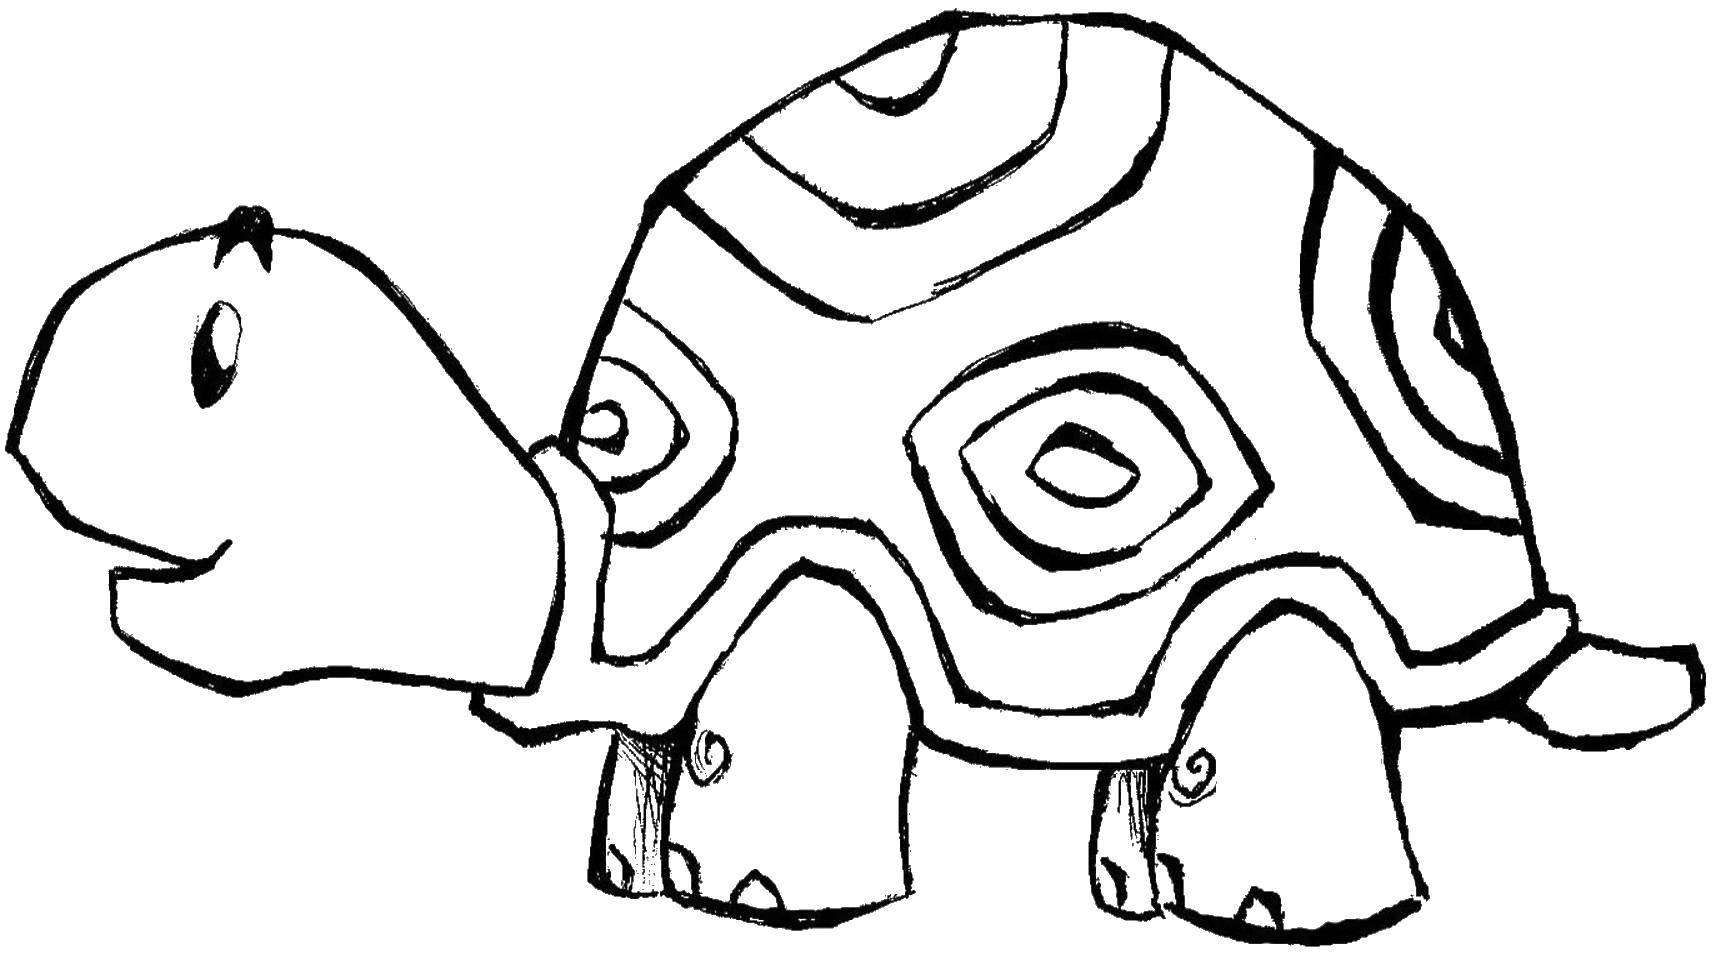 Coloring Turtle. Category Animals. Tags:  Turtle.